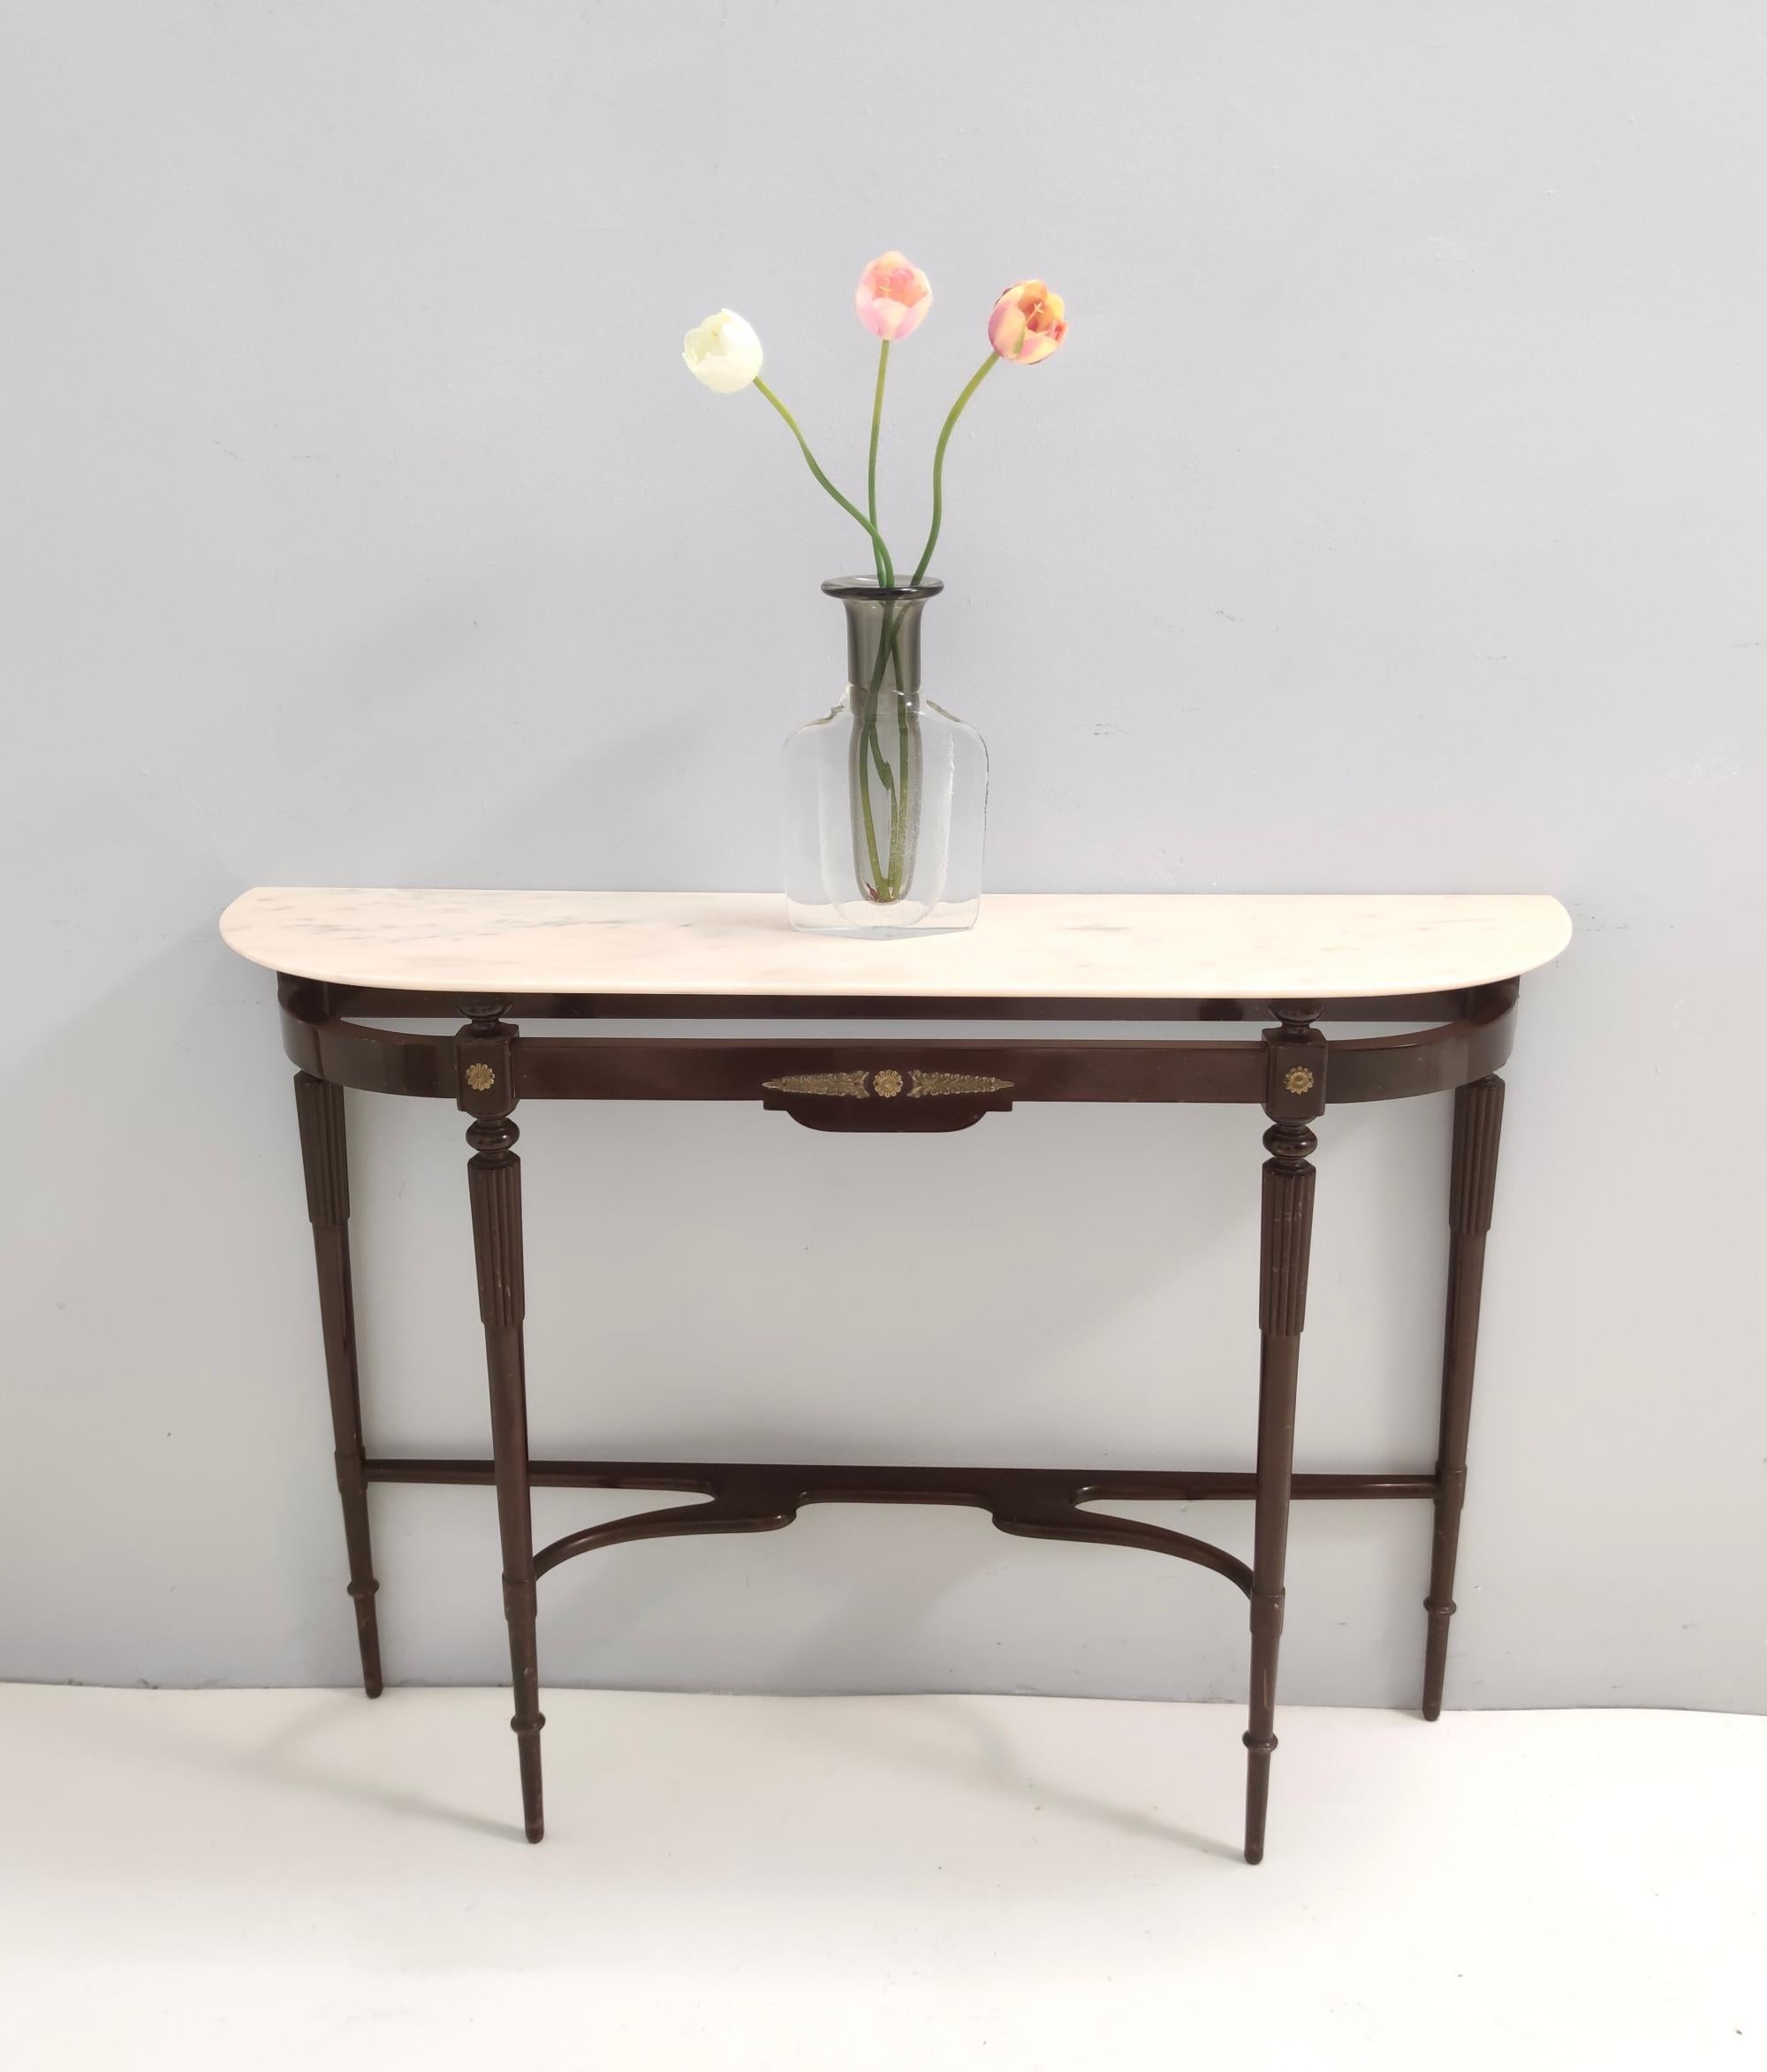 Made in Italy, 1960s.
It features a beech frame, brass parts and a Portuguese pink marble top.
It might show slight traces of use since it's vintage, but it can be considered as in excellent original condition and ready to become a piece in a home.